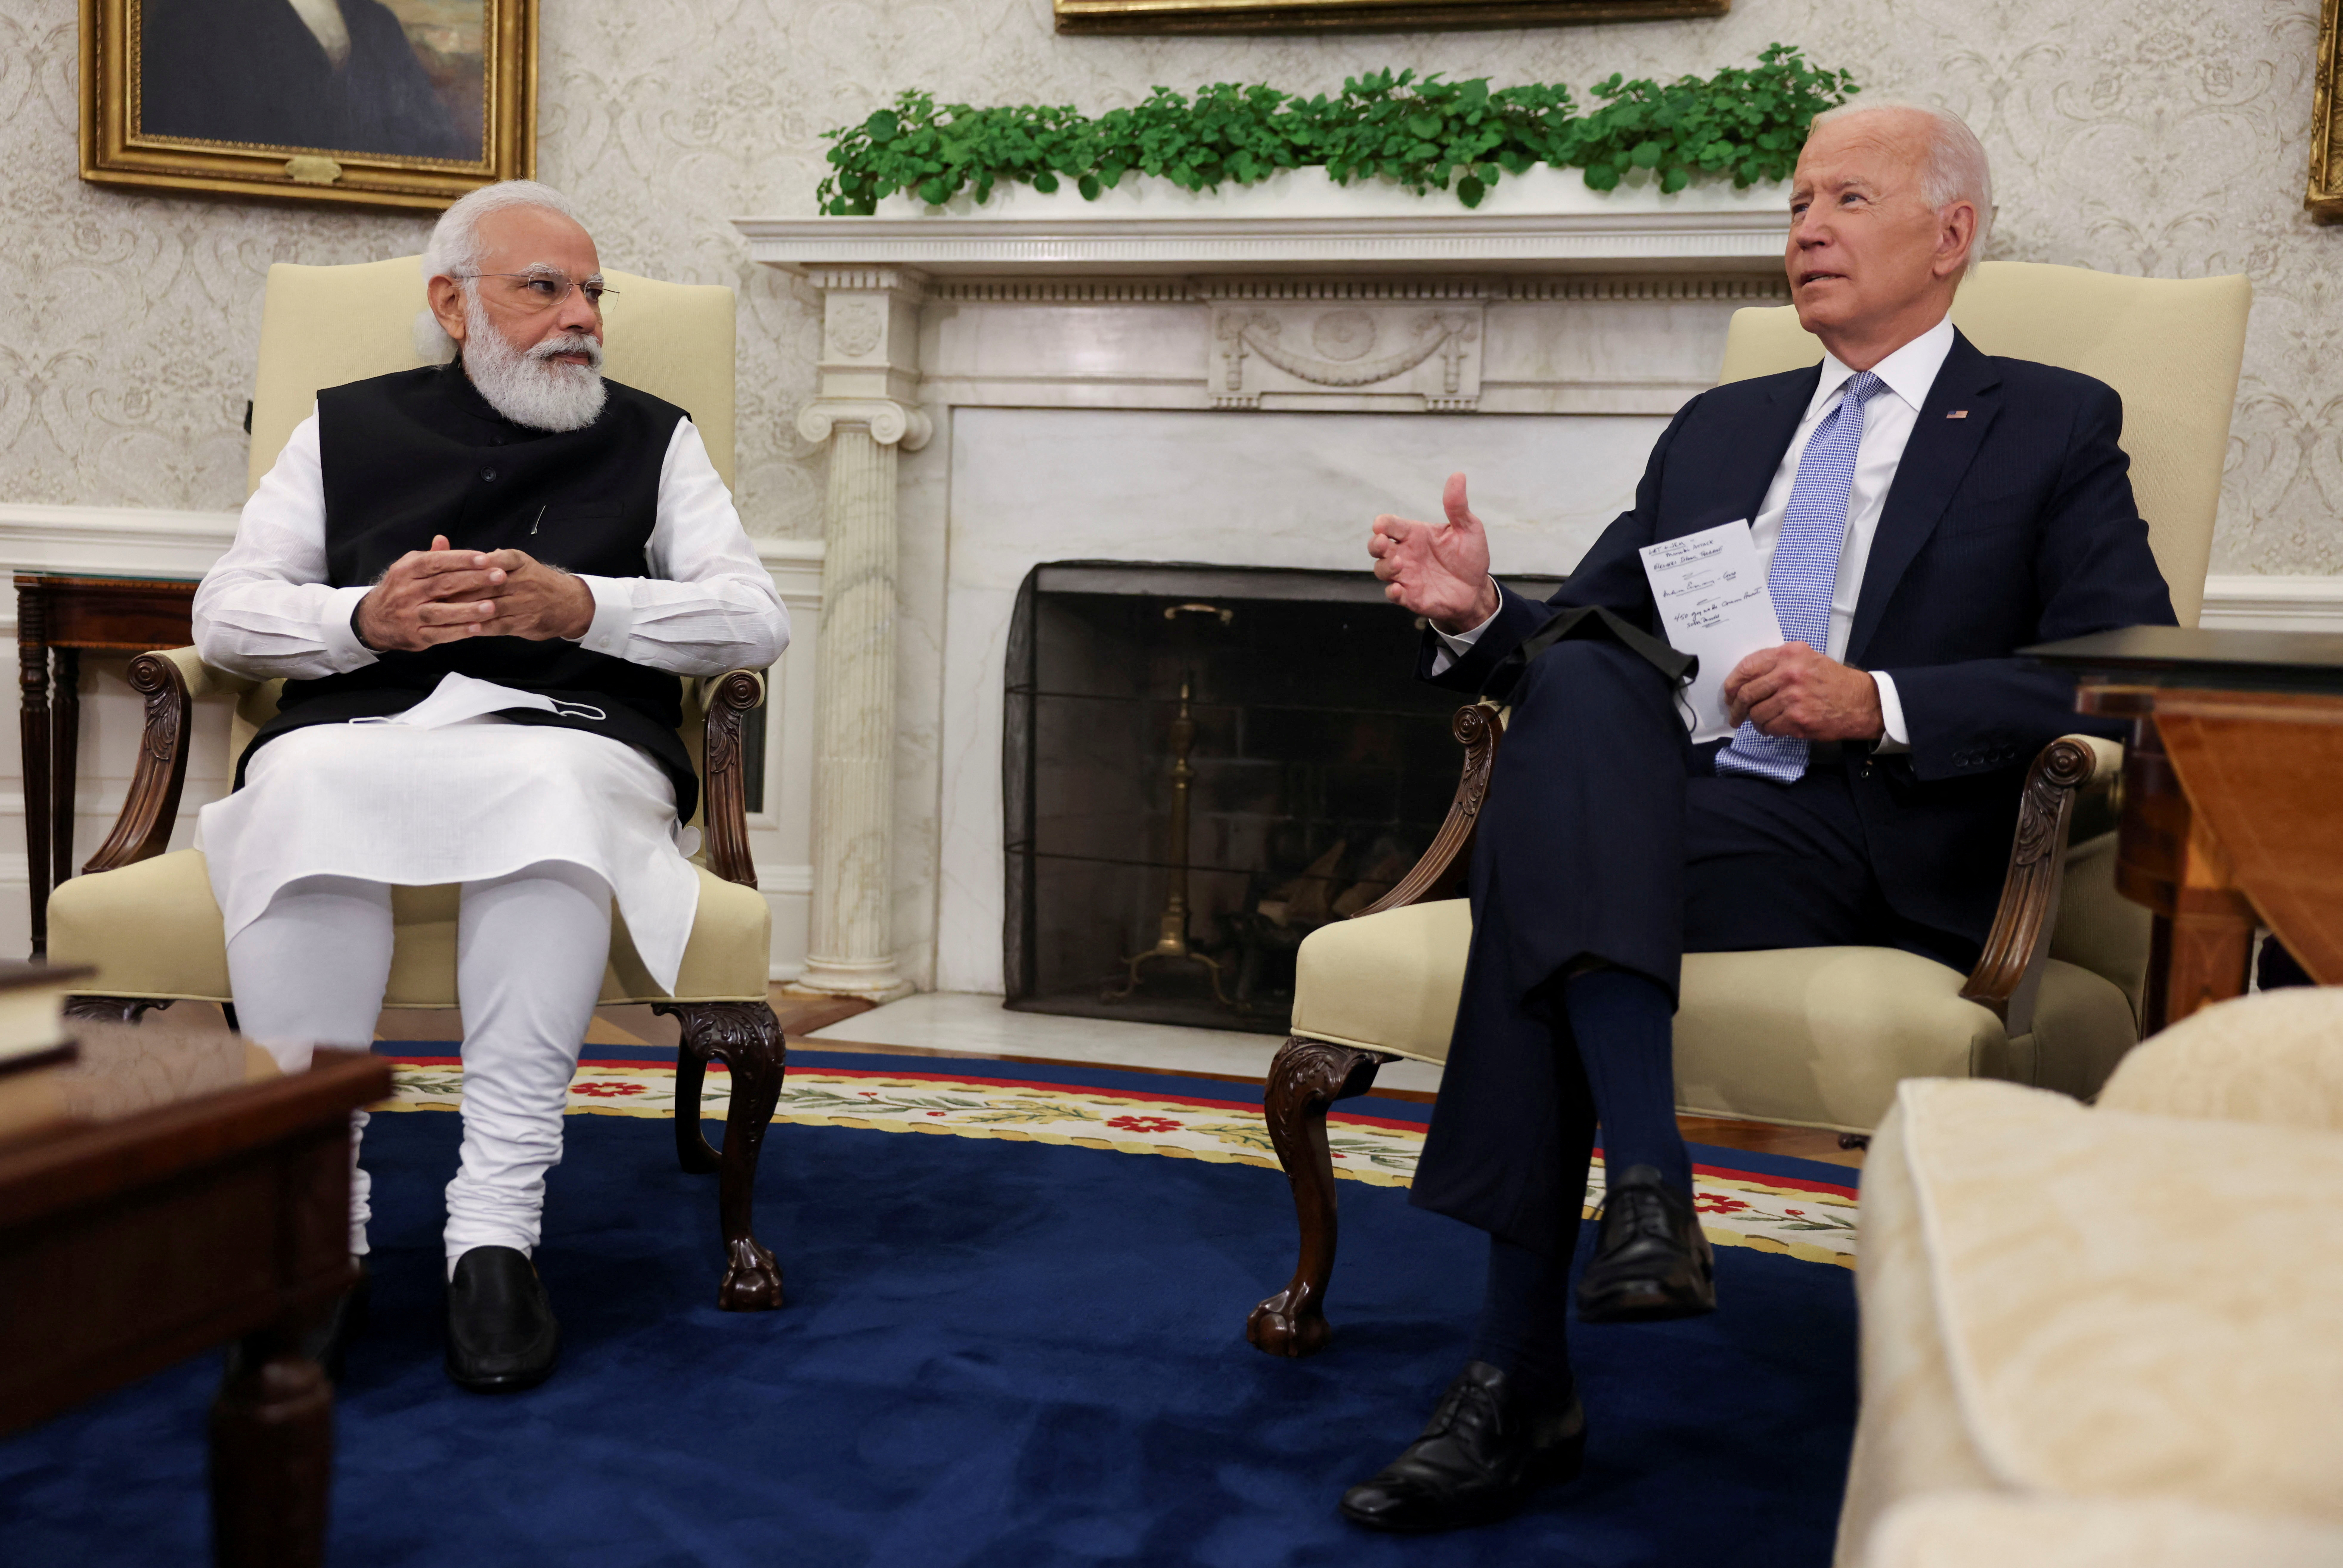 Biden is ready to fete India's leader, looking past Modi's human rights record, ties to Russia